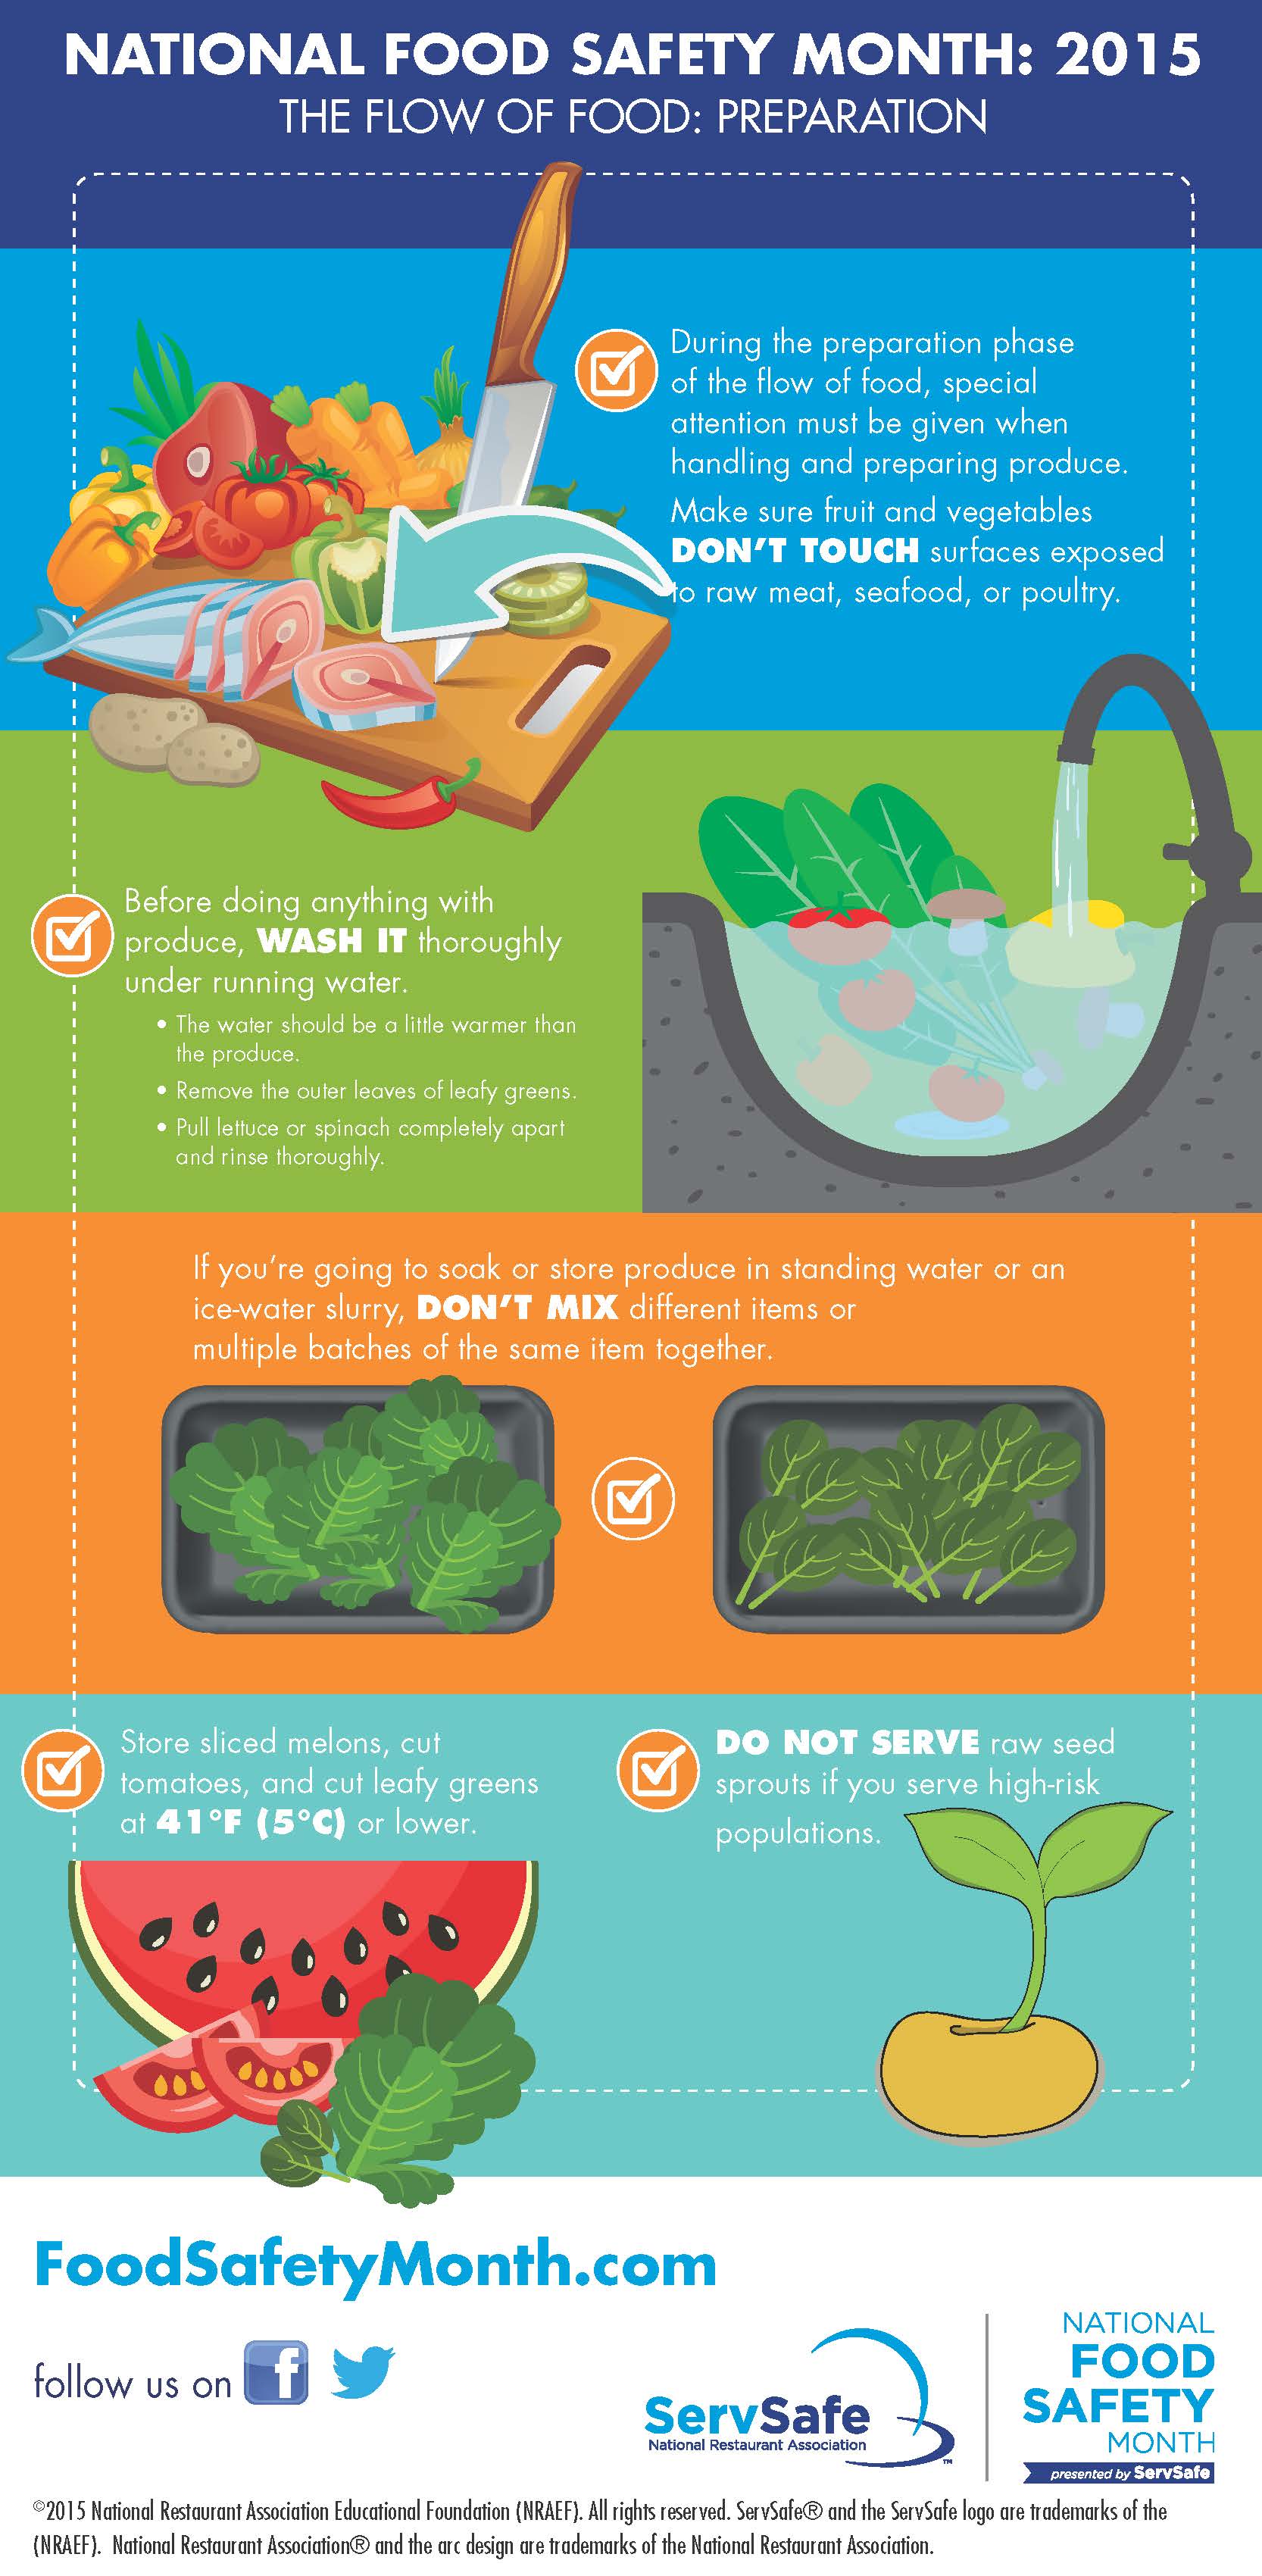 National Food Safety Month “Let it Flow”